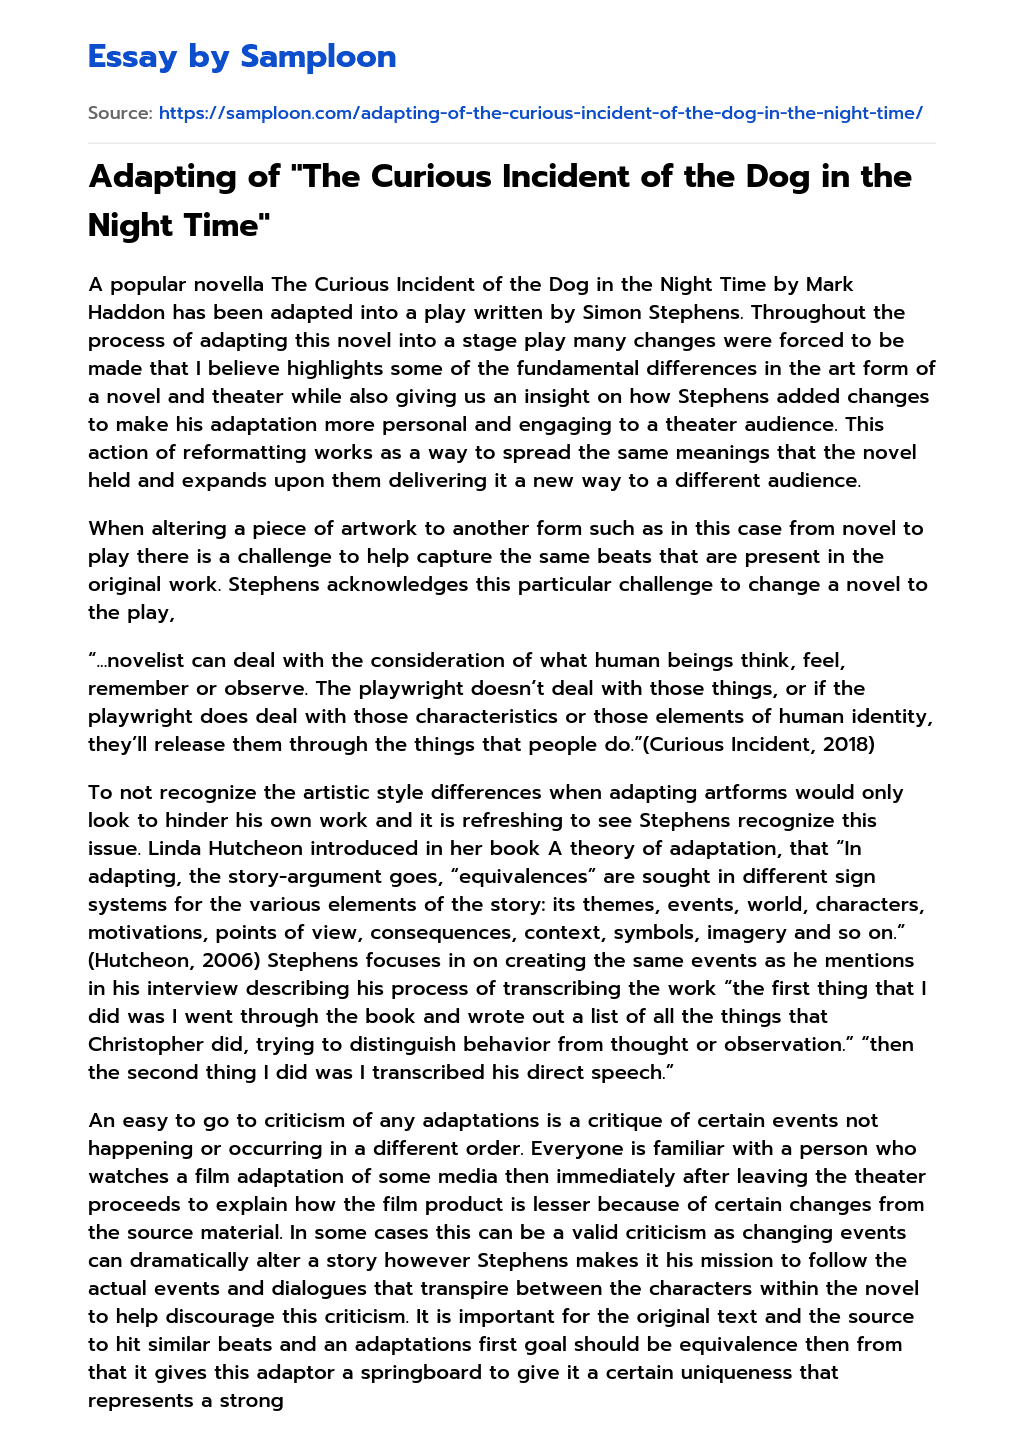 Adapting of “The Curious Incident of the Dog in the Night Time” essay